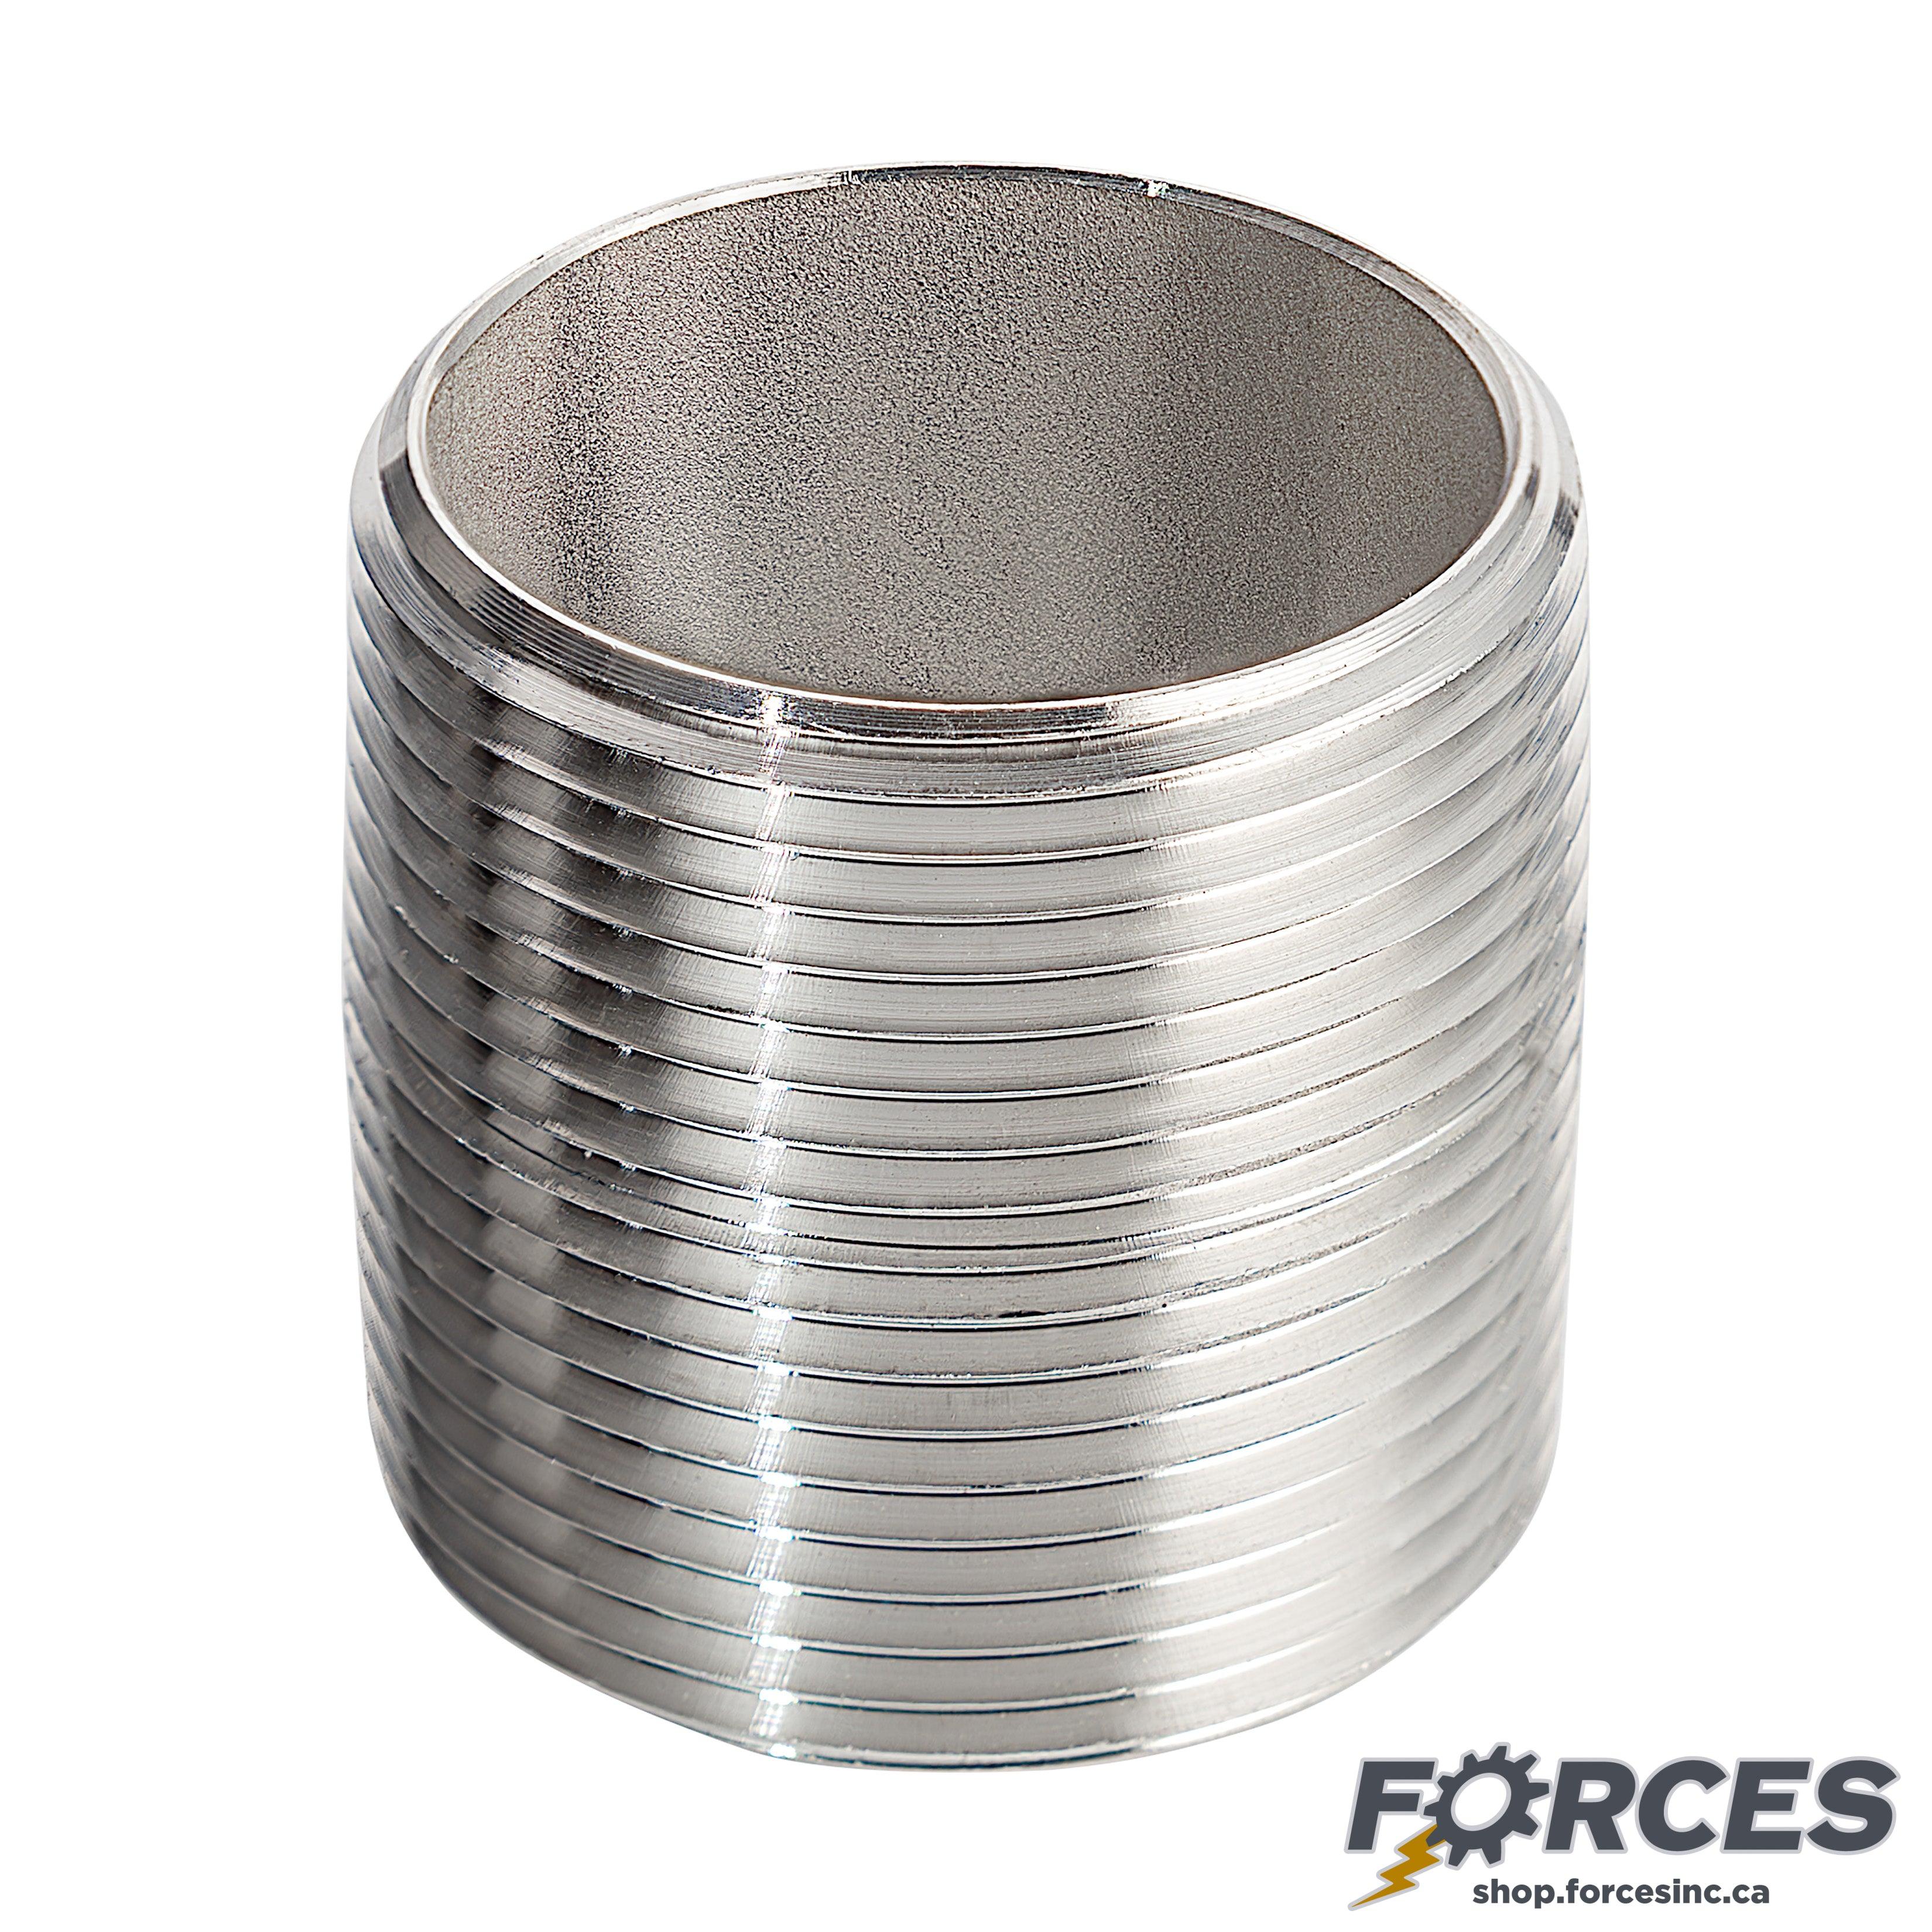 1" Closed Nipple - Stainless Steel 316 - Forces Inc